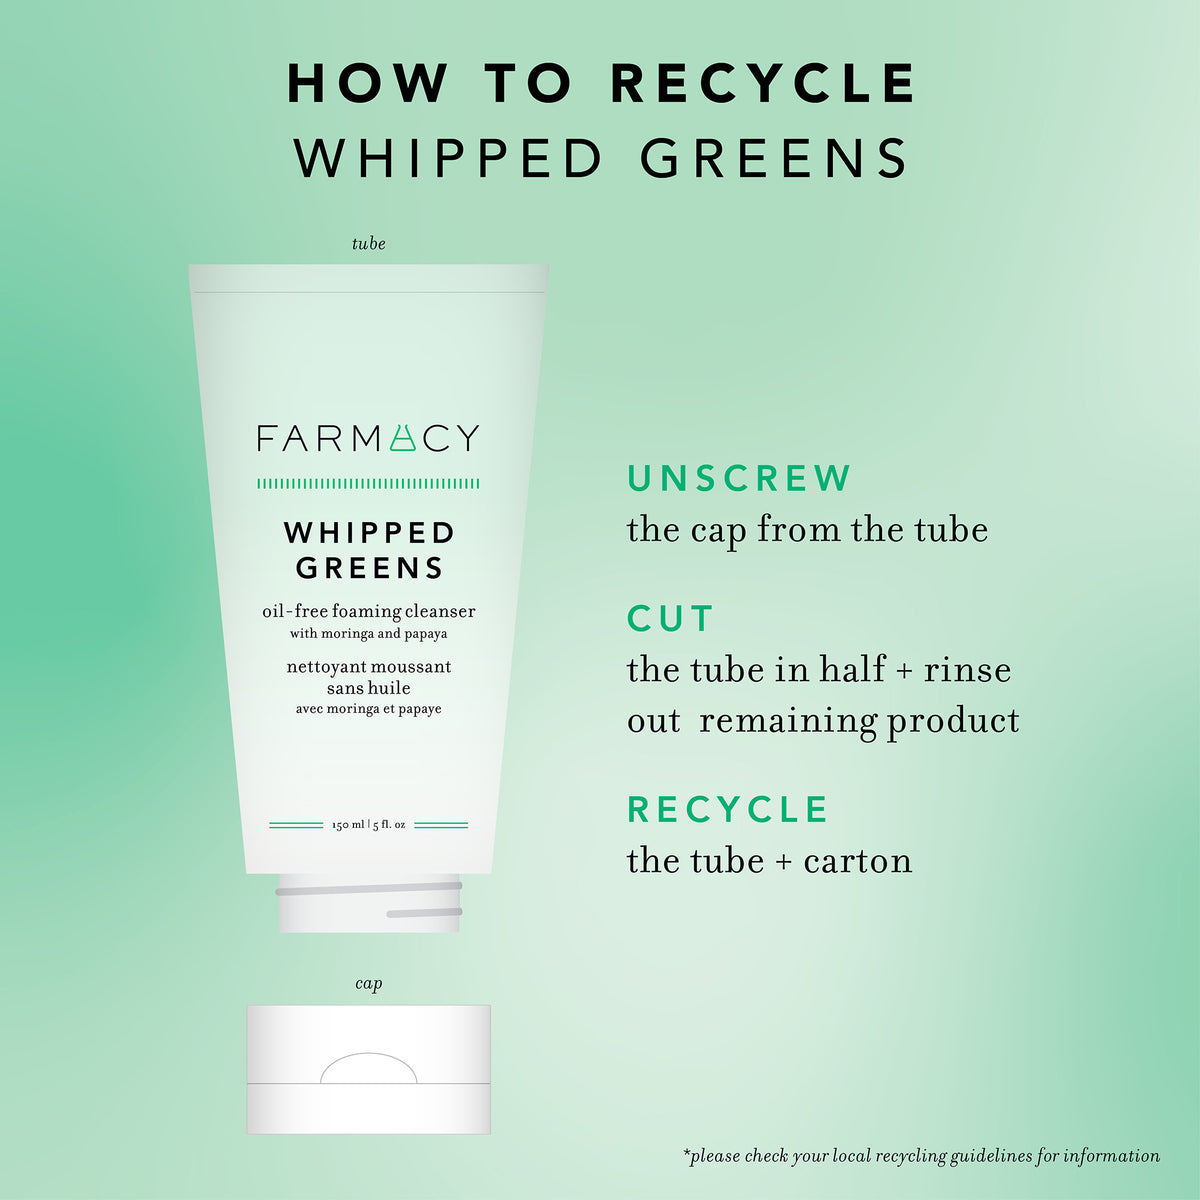 How to recycle Whipped Greens